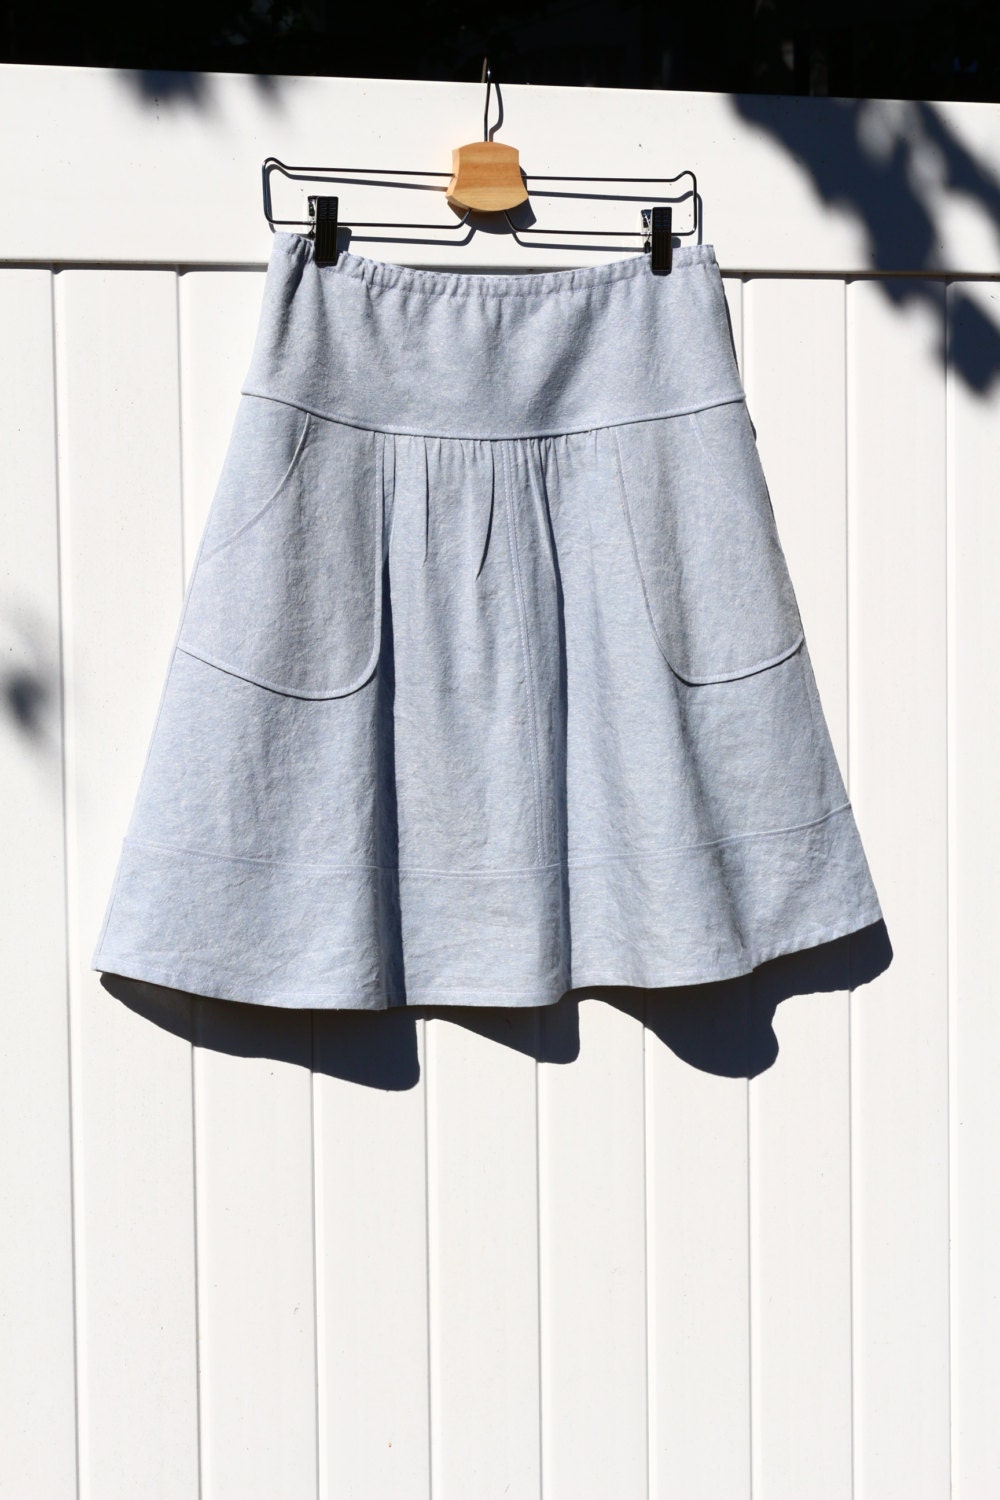 Light Blue Linen Blend Skirt With Rounded Apron Pockets, Semi Gathered A-Line Skirt, Made To Order in All Lengths, & Sizes Petite Plus